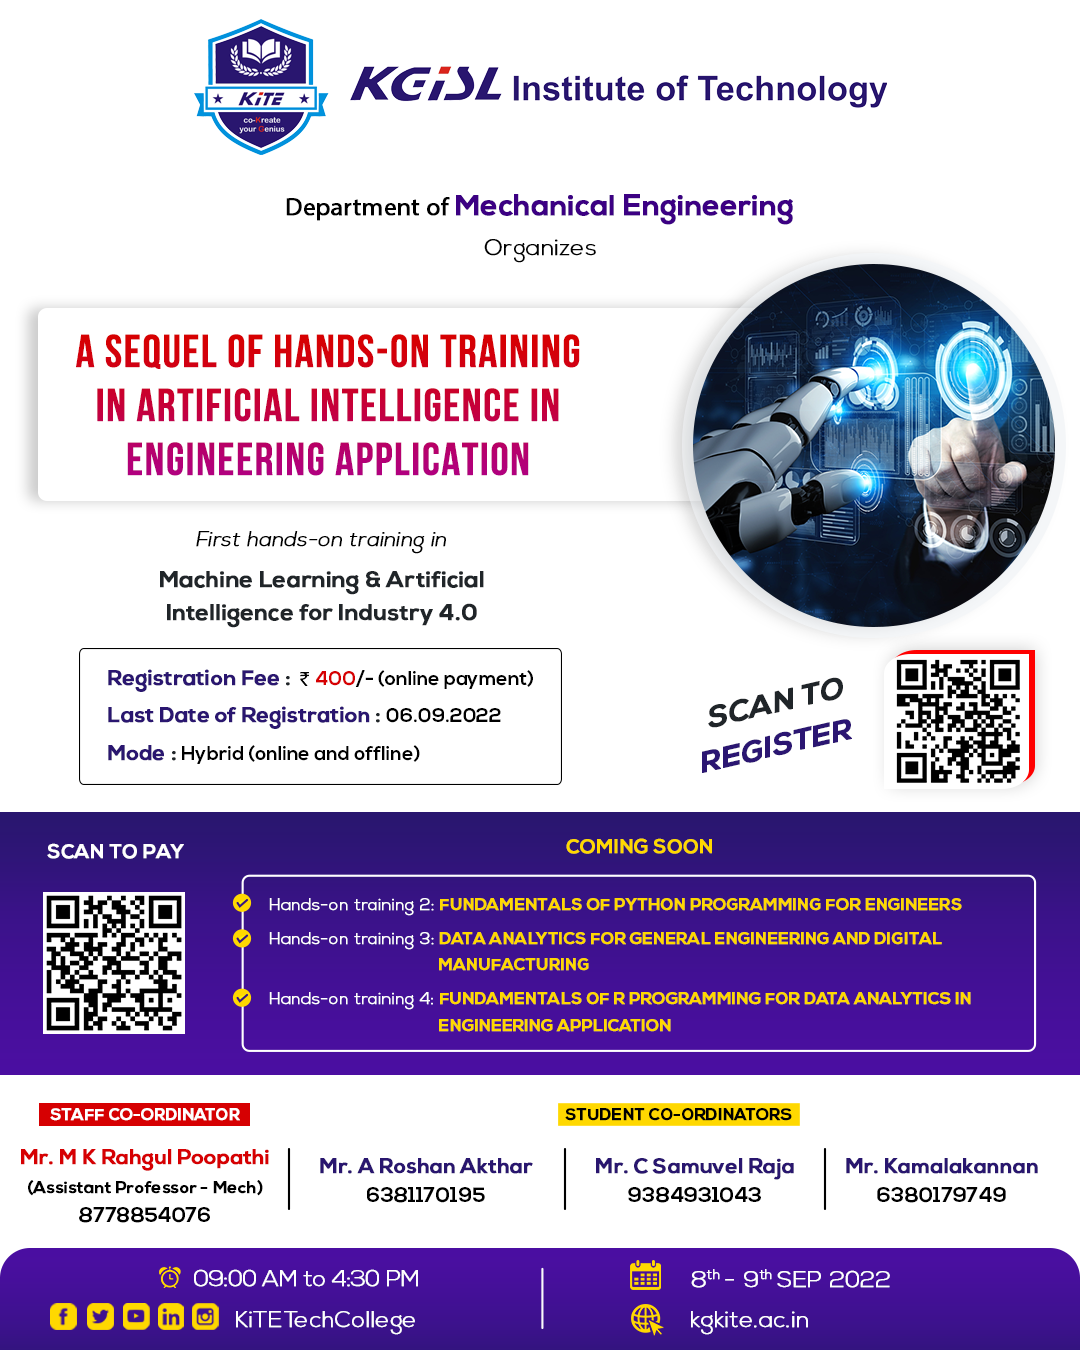 Hands-on Training in Machine Learning and Artificial Intelligence for Industry 4.0